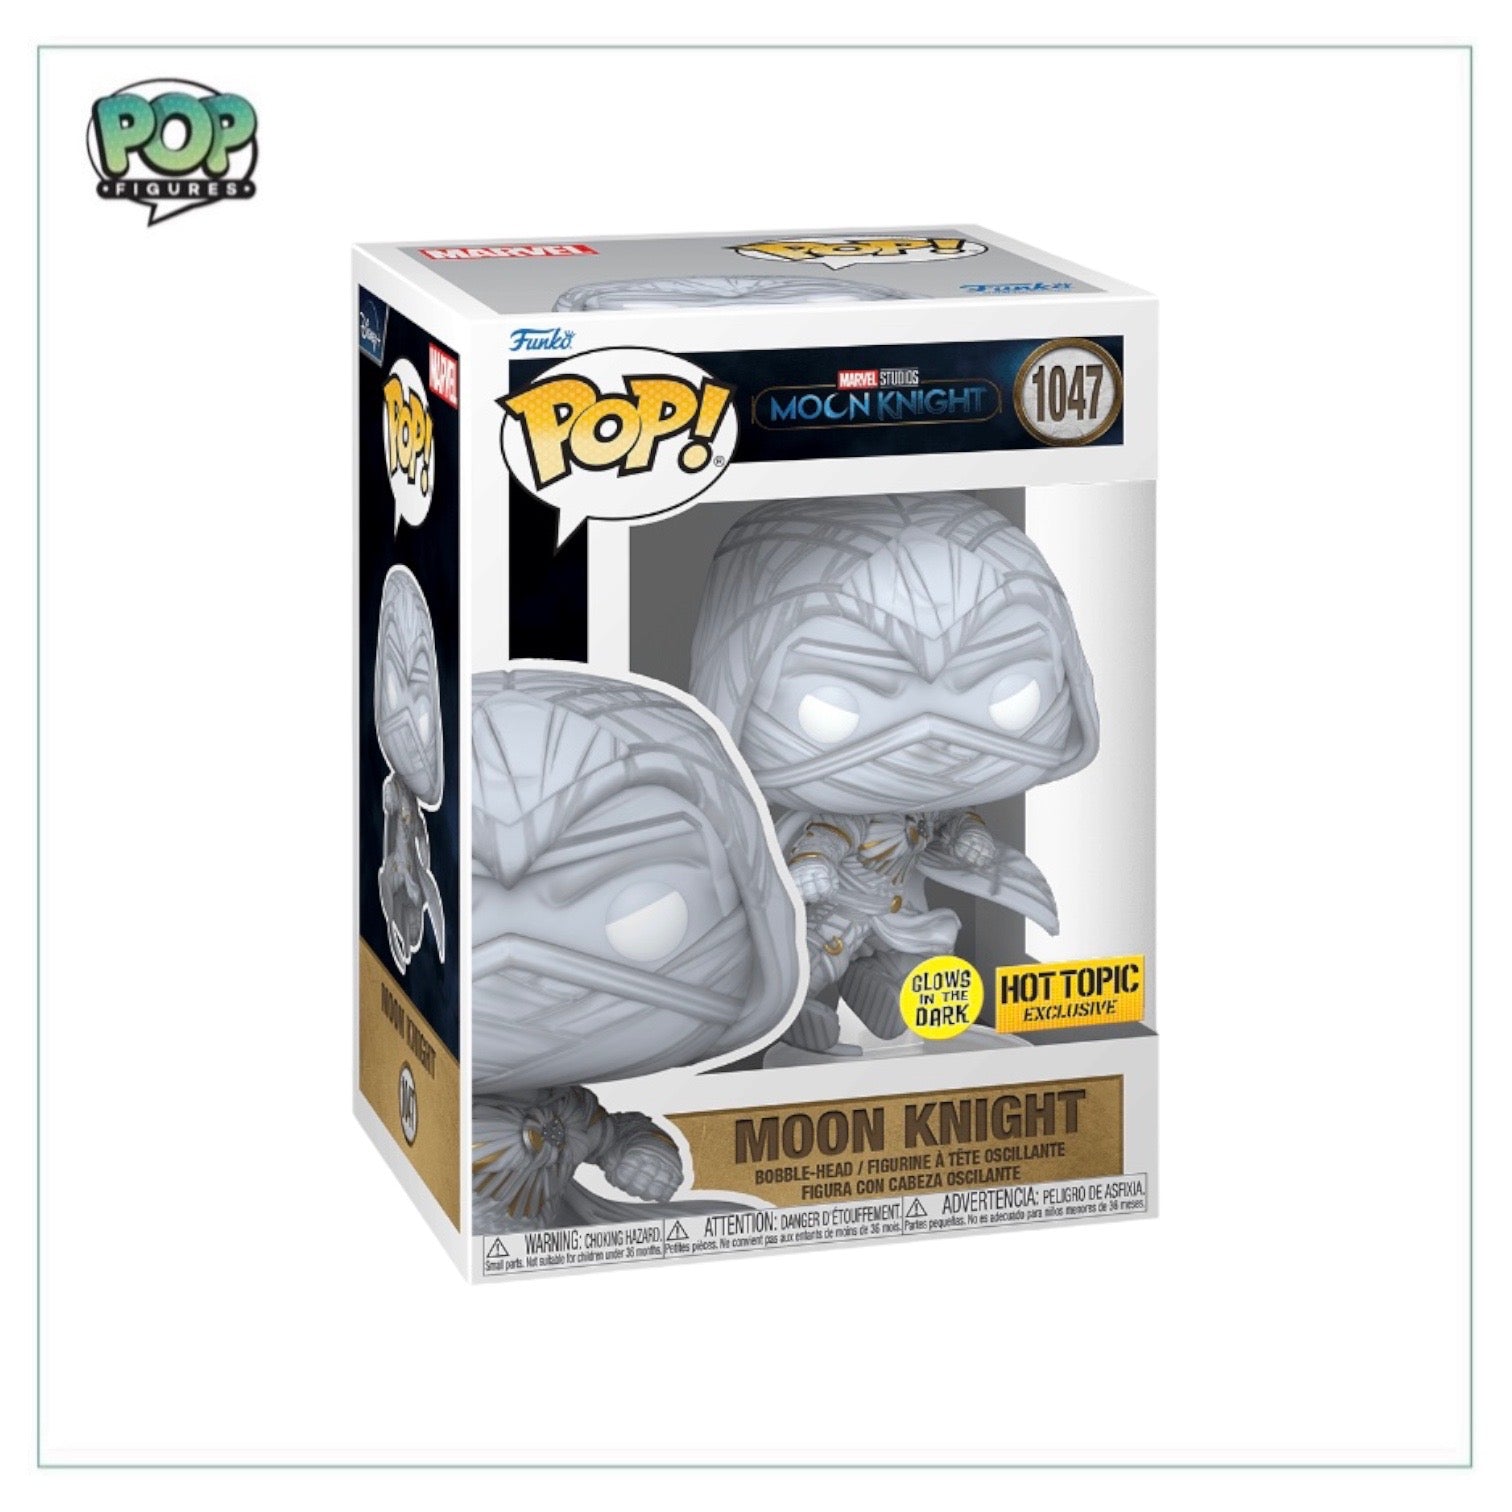 Moon Knight #1047 (Glows in The Dark) Funko Pop! - Moon Knight - Hot Topic Exclusive